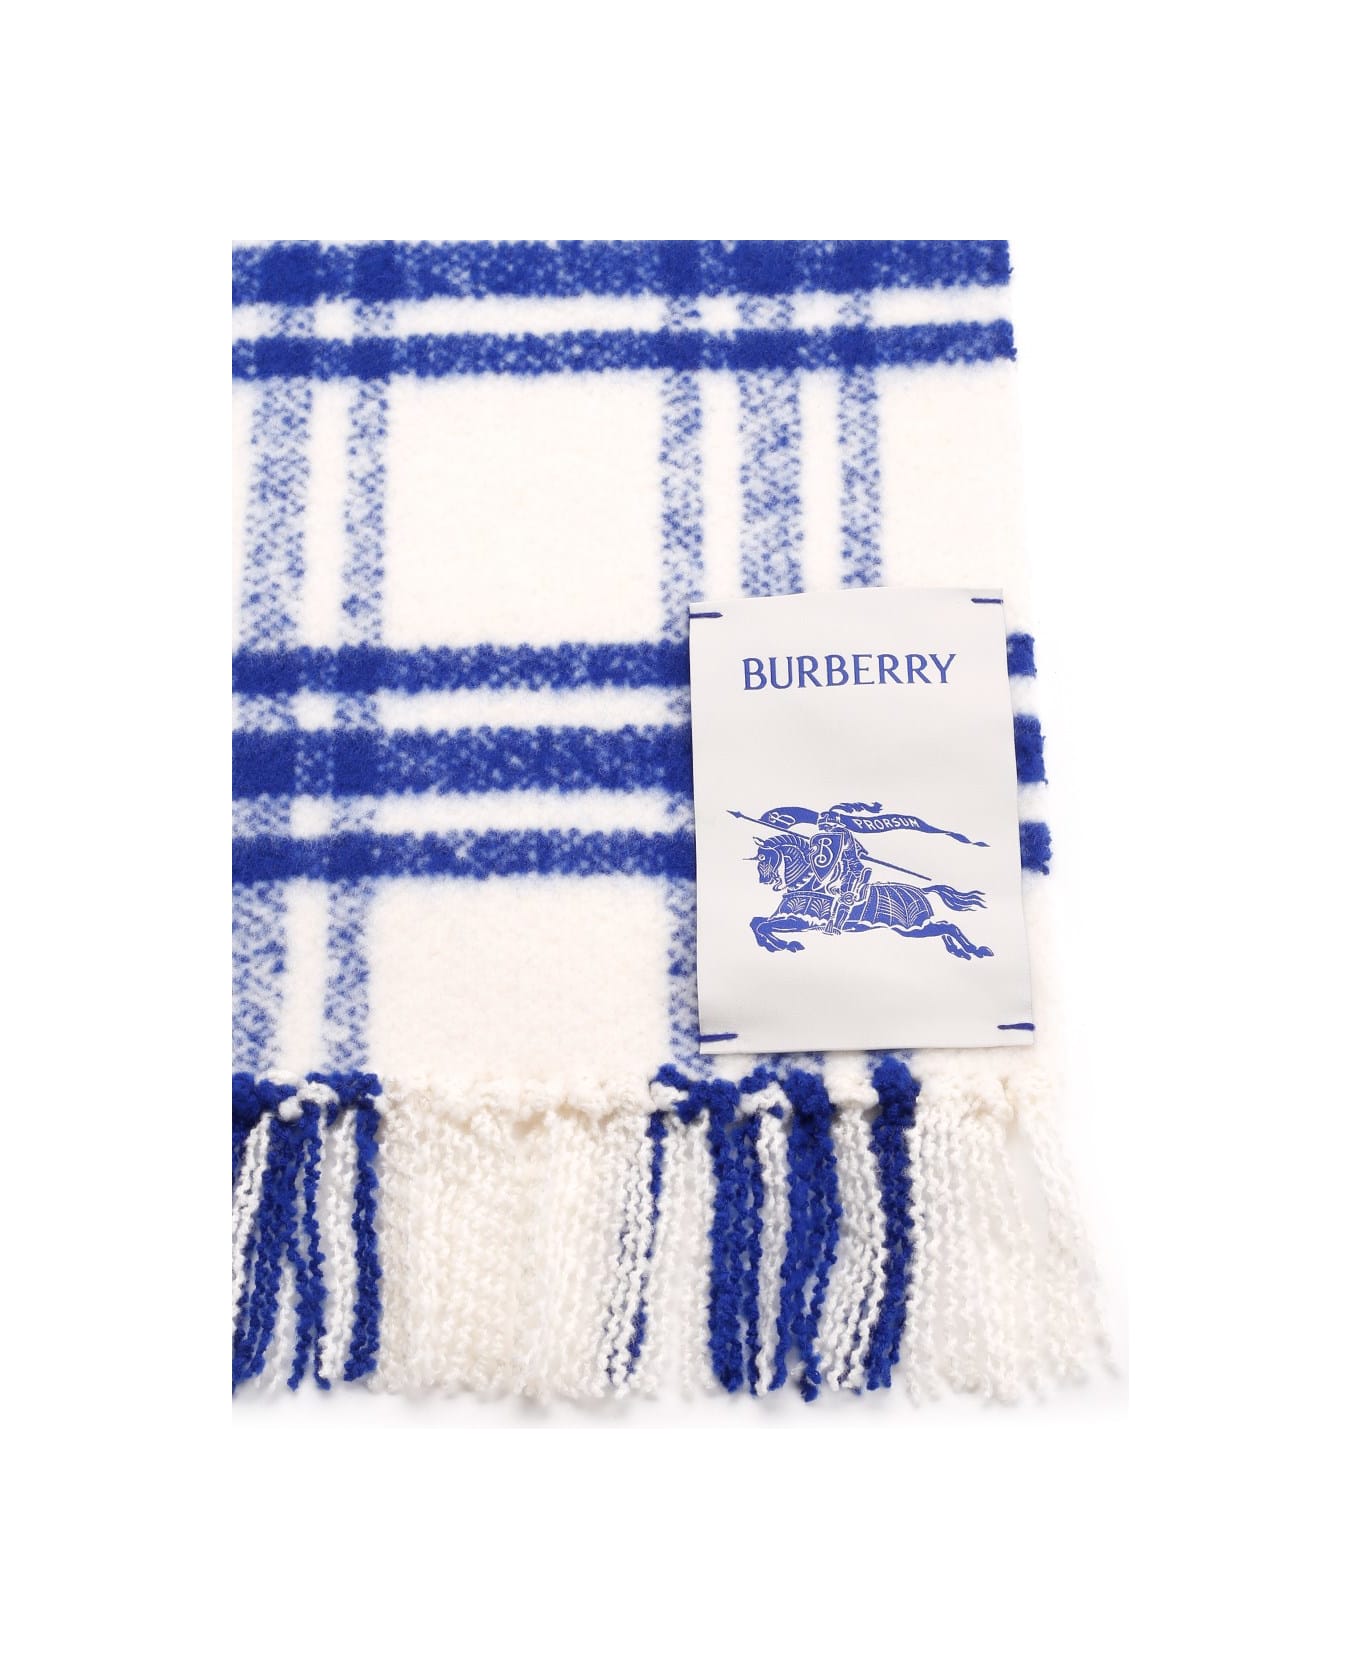 Burberry Brushed Wool Scarf - Multicolor スカーフ